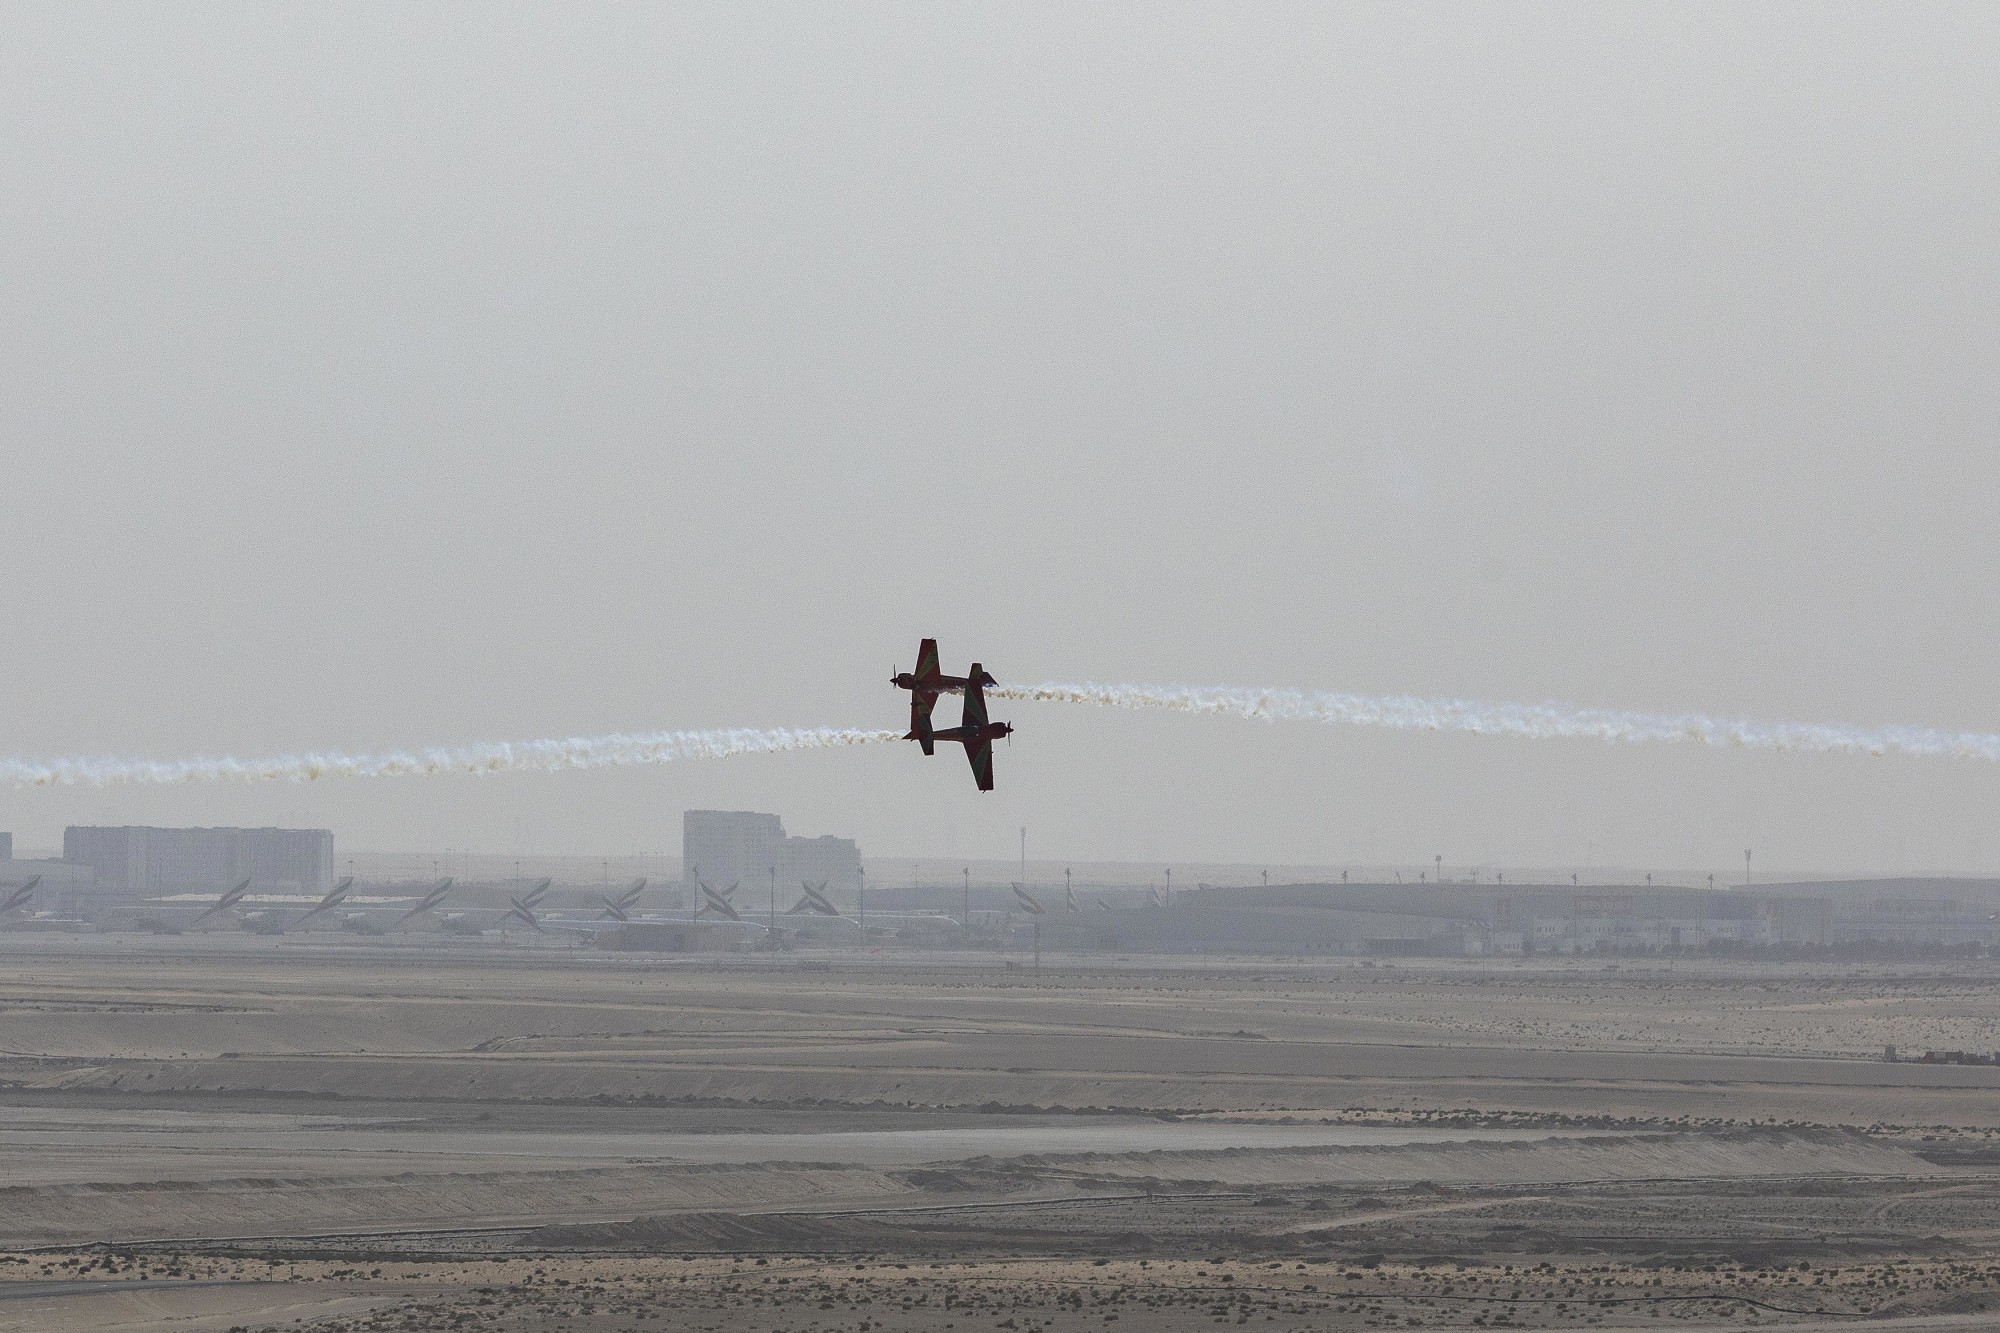 Air Show by the Green March Moroccan Patrol during Morocco National Day m27644